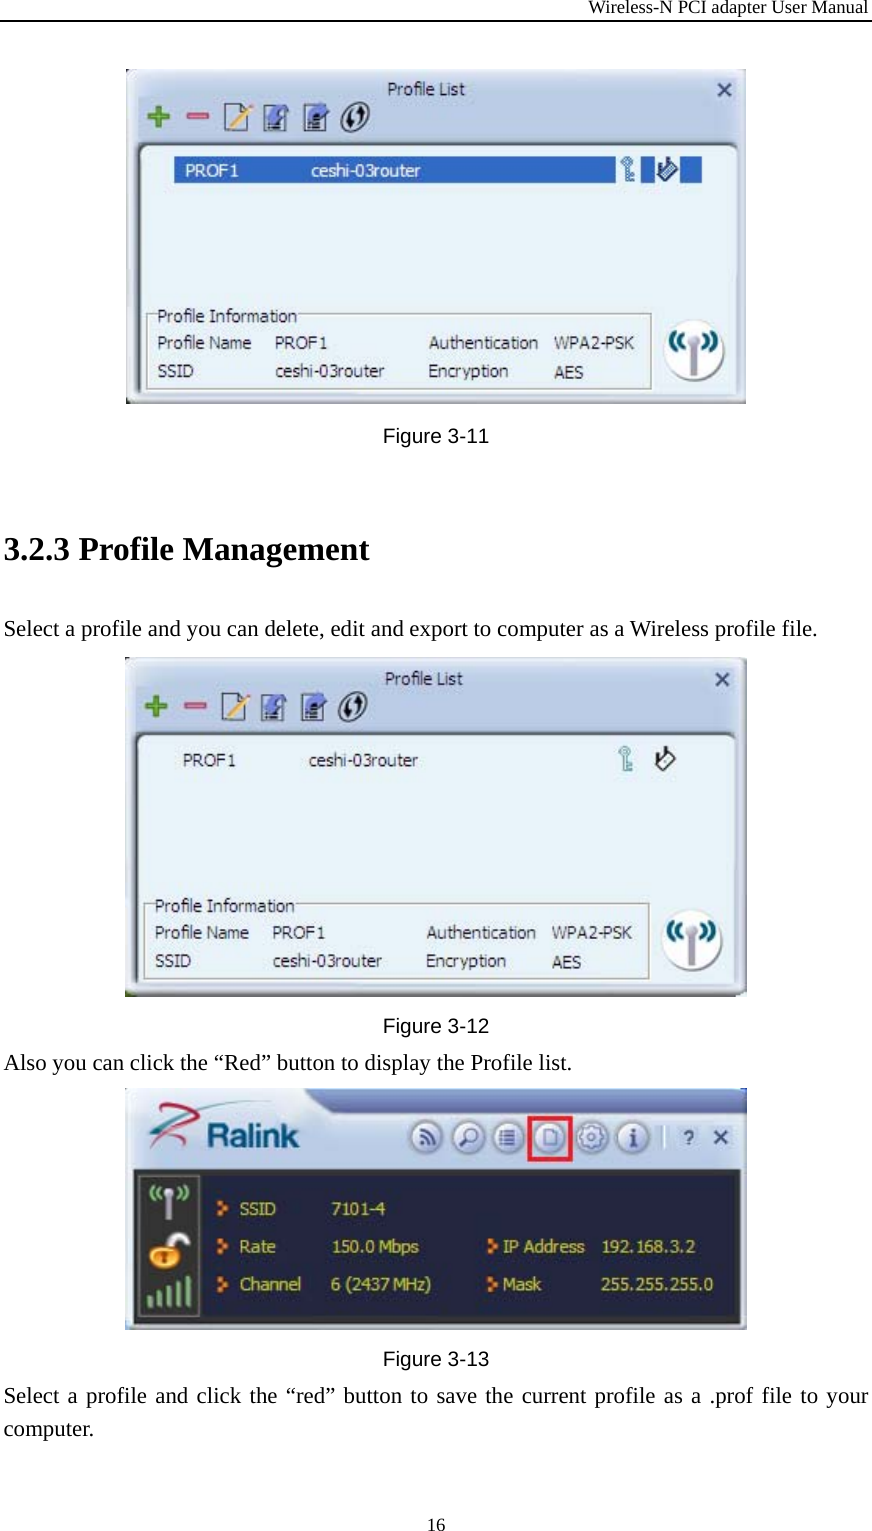 Wireless-N PCI adapter User Manual 16 Figure 3-11 3.2.3 Profile Management Select a profile and you can delete, edit and export to computer as a Wireless profile file. Figure 3-12 Also you can click the “Red” button to display the Profile list. Figure 3-13 Select a profile and click the “red” button to save the current profile as a .prof file to your computer. 